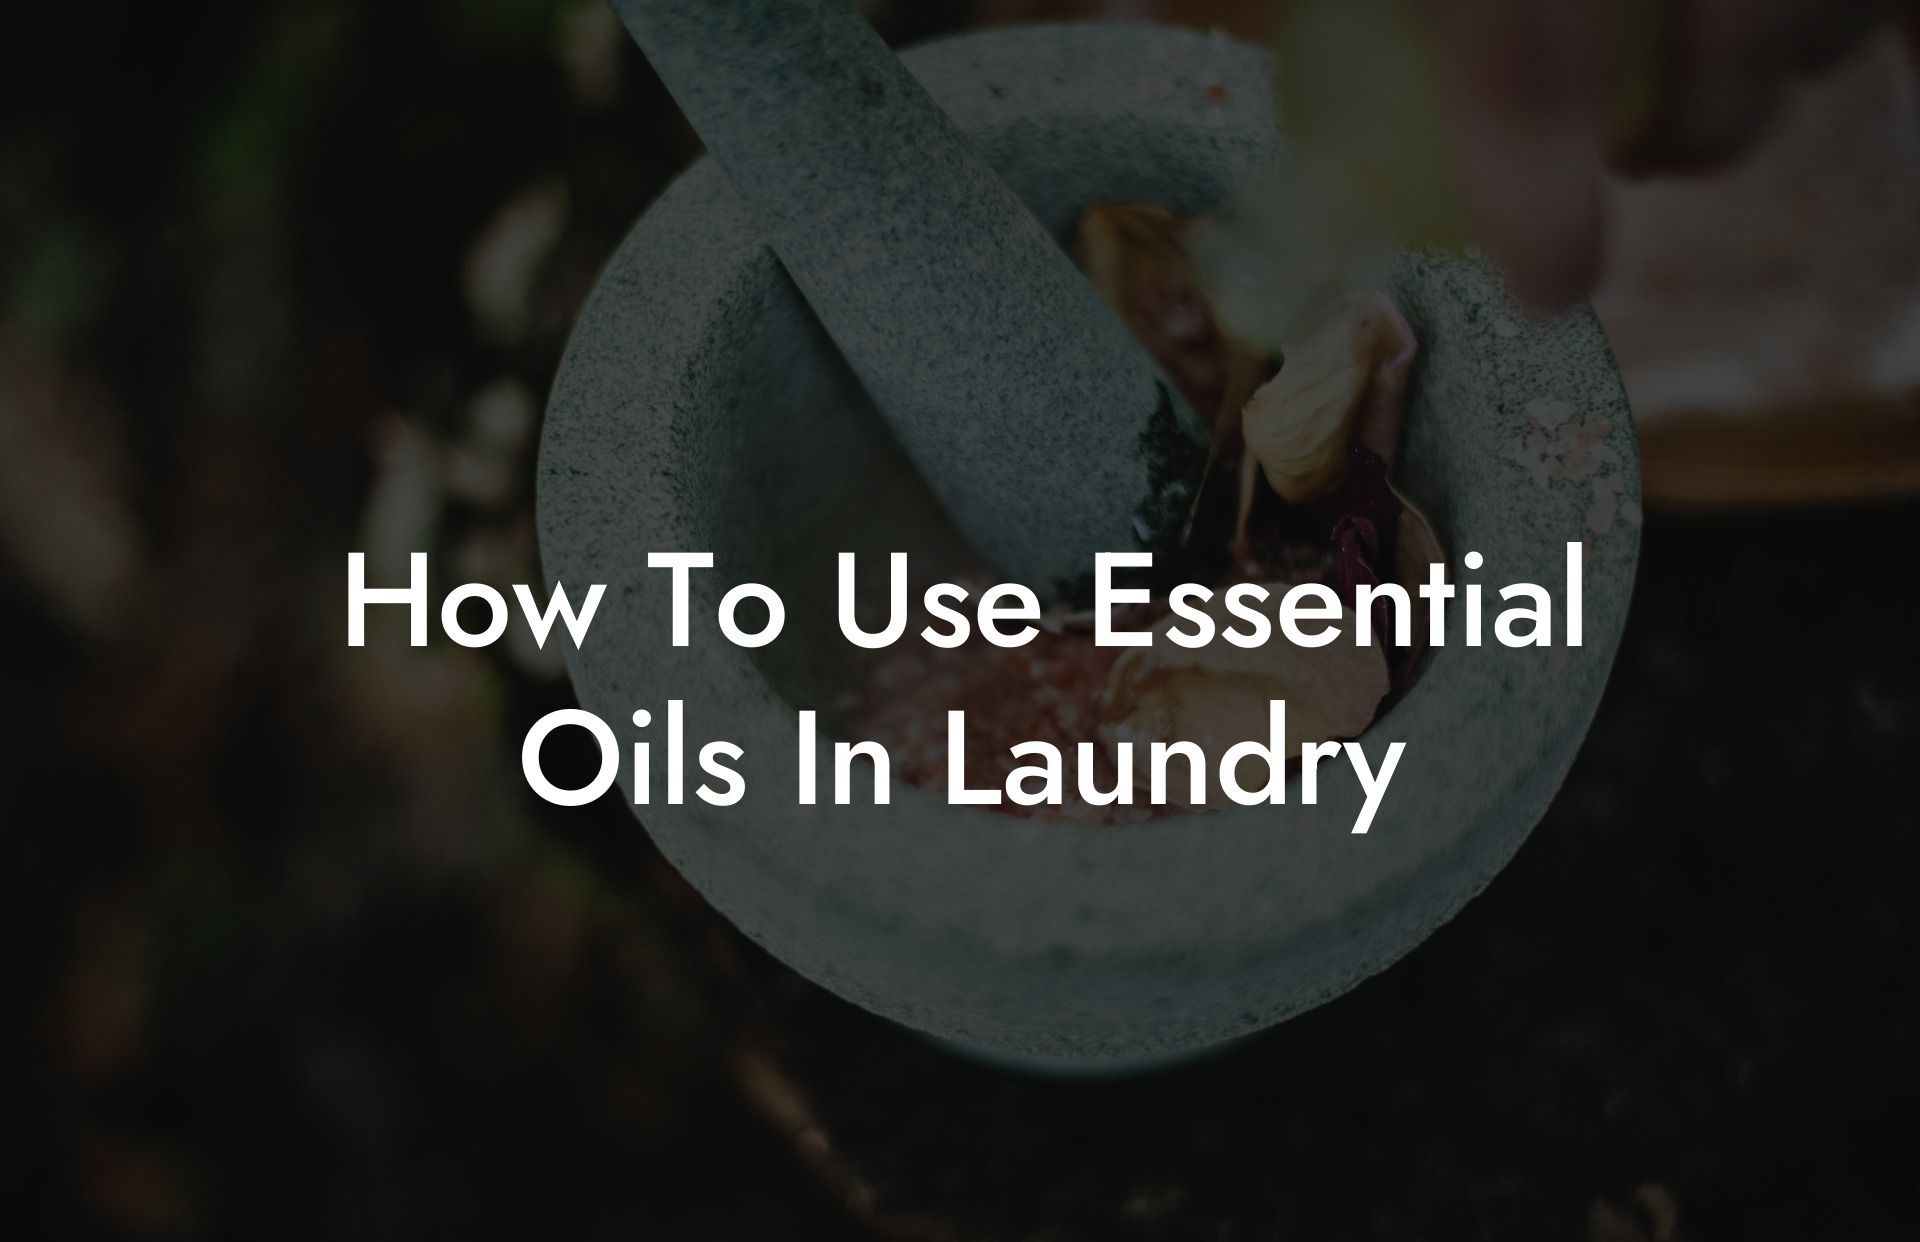 How To Use Essential Oils In Laundry